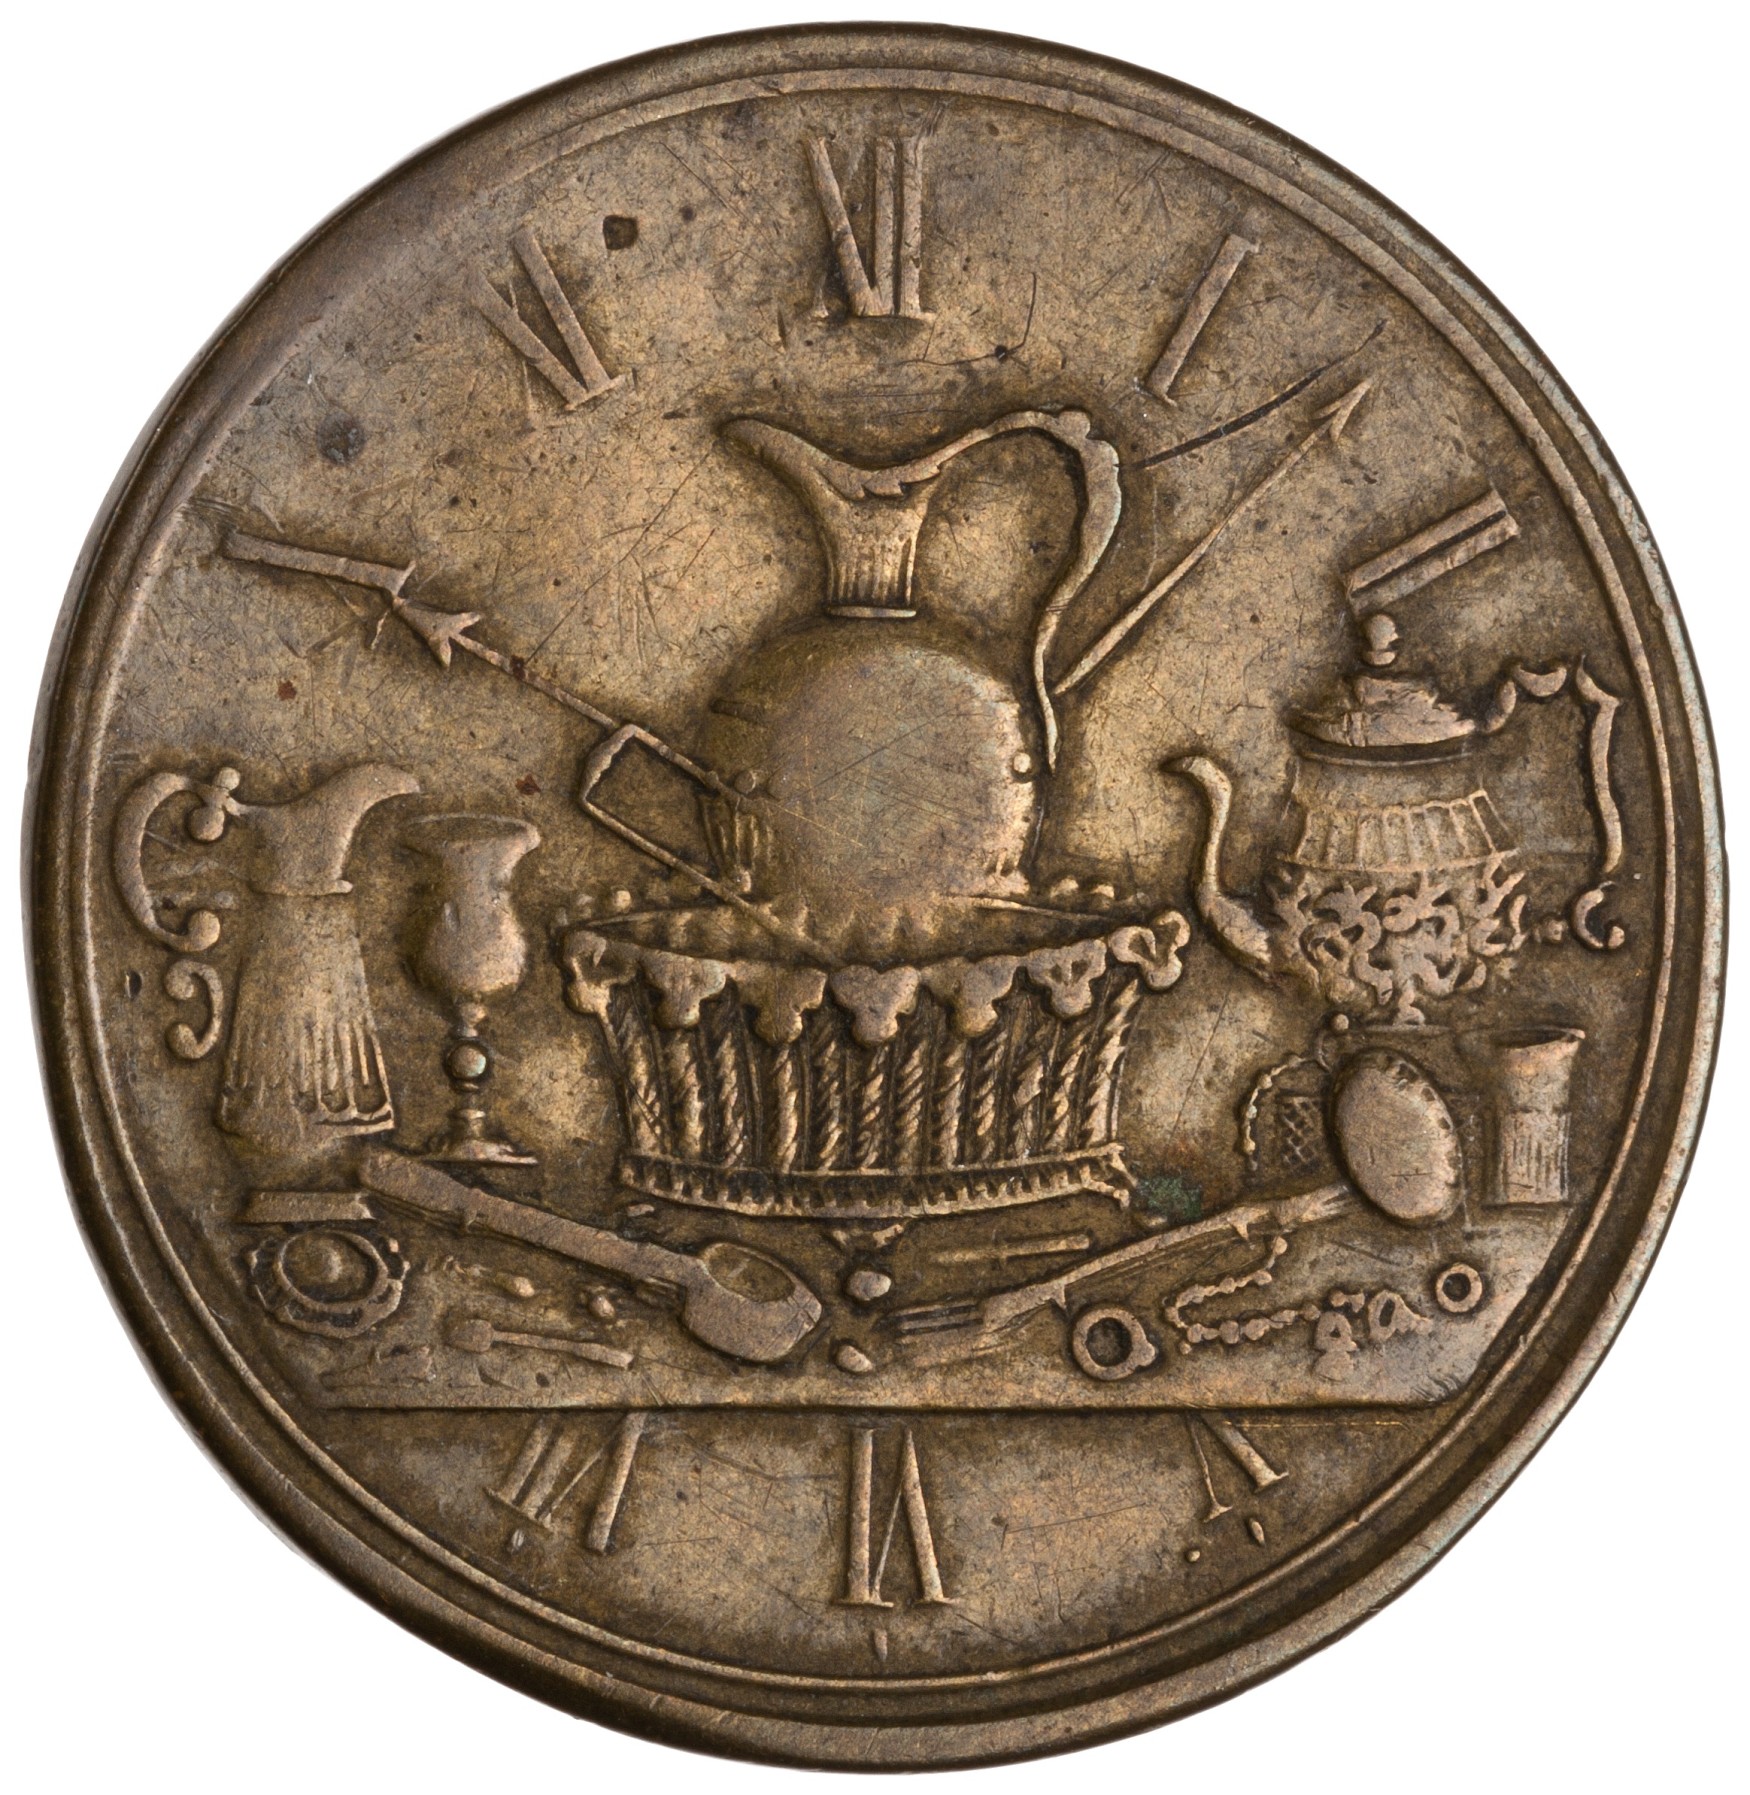 Mysteries from the Vault: H.R.C. Clock Token